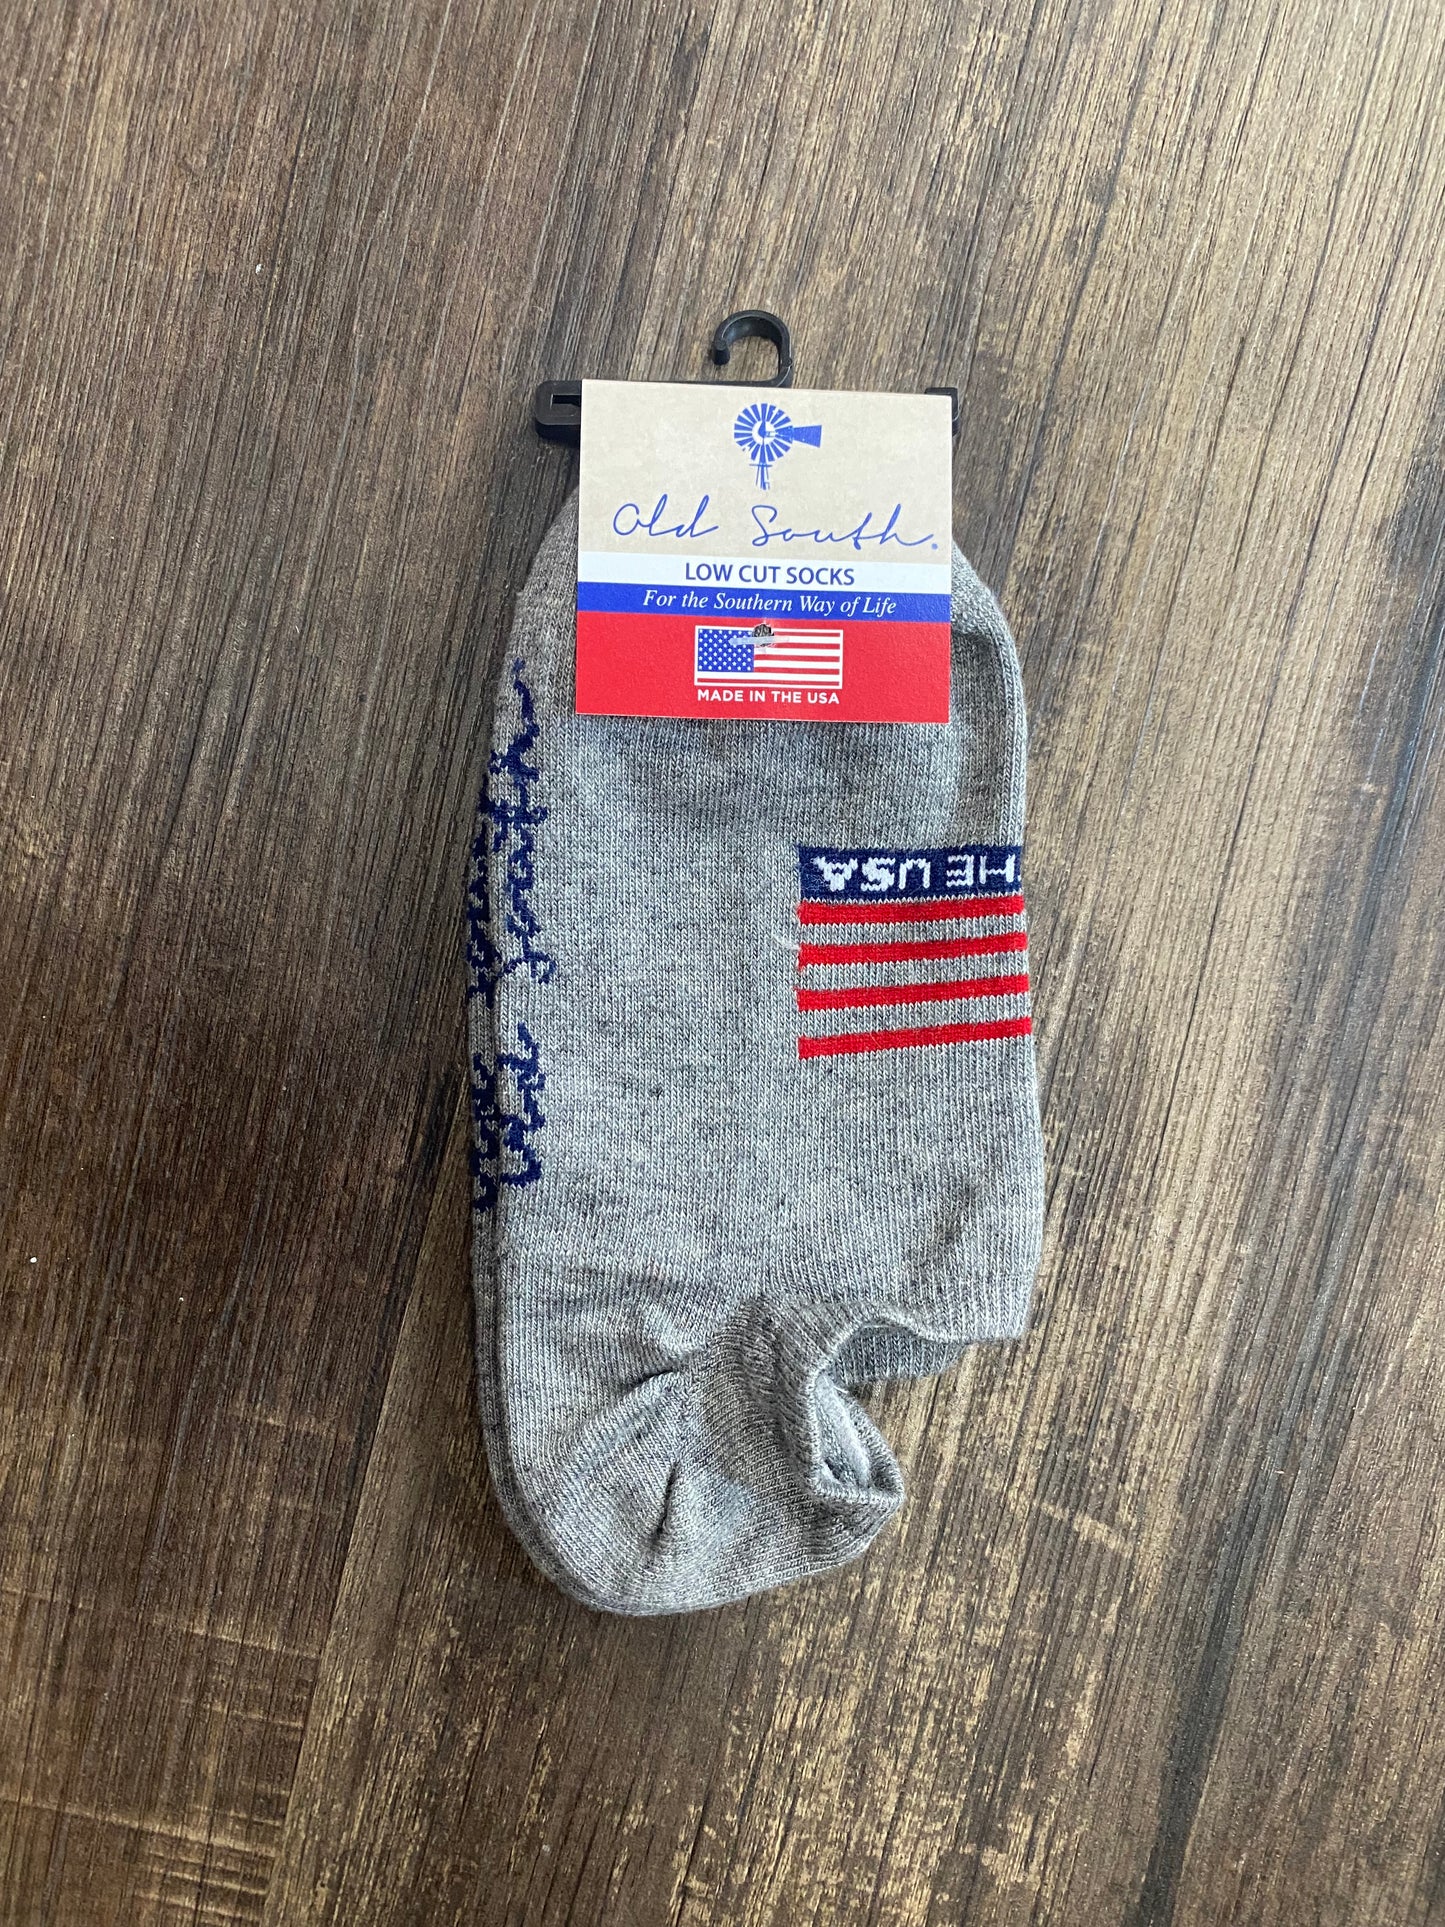 Old South Made in the USA Low Cut Socks